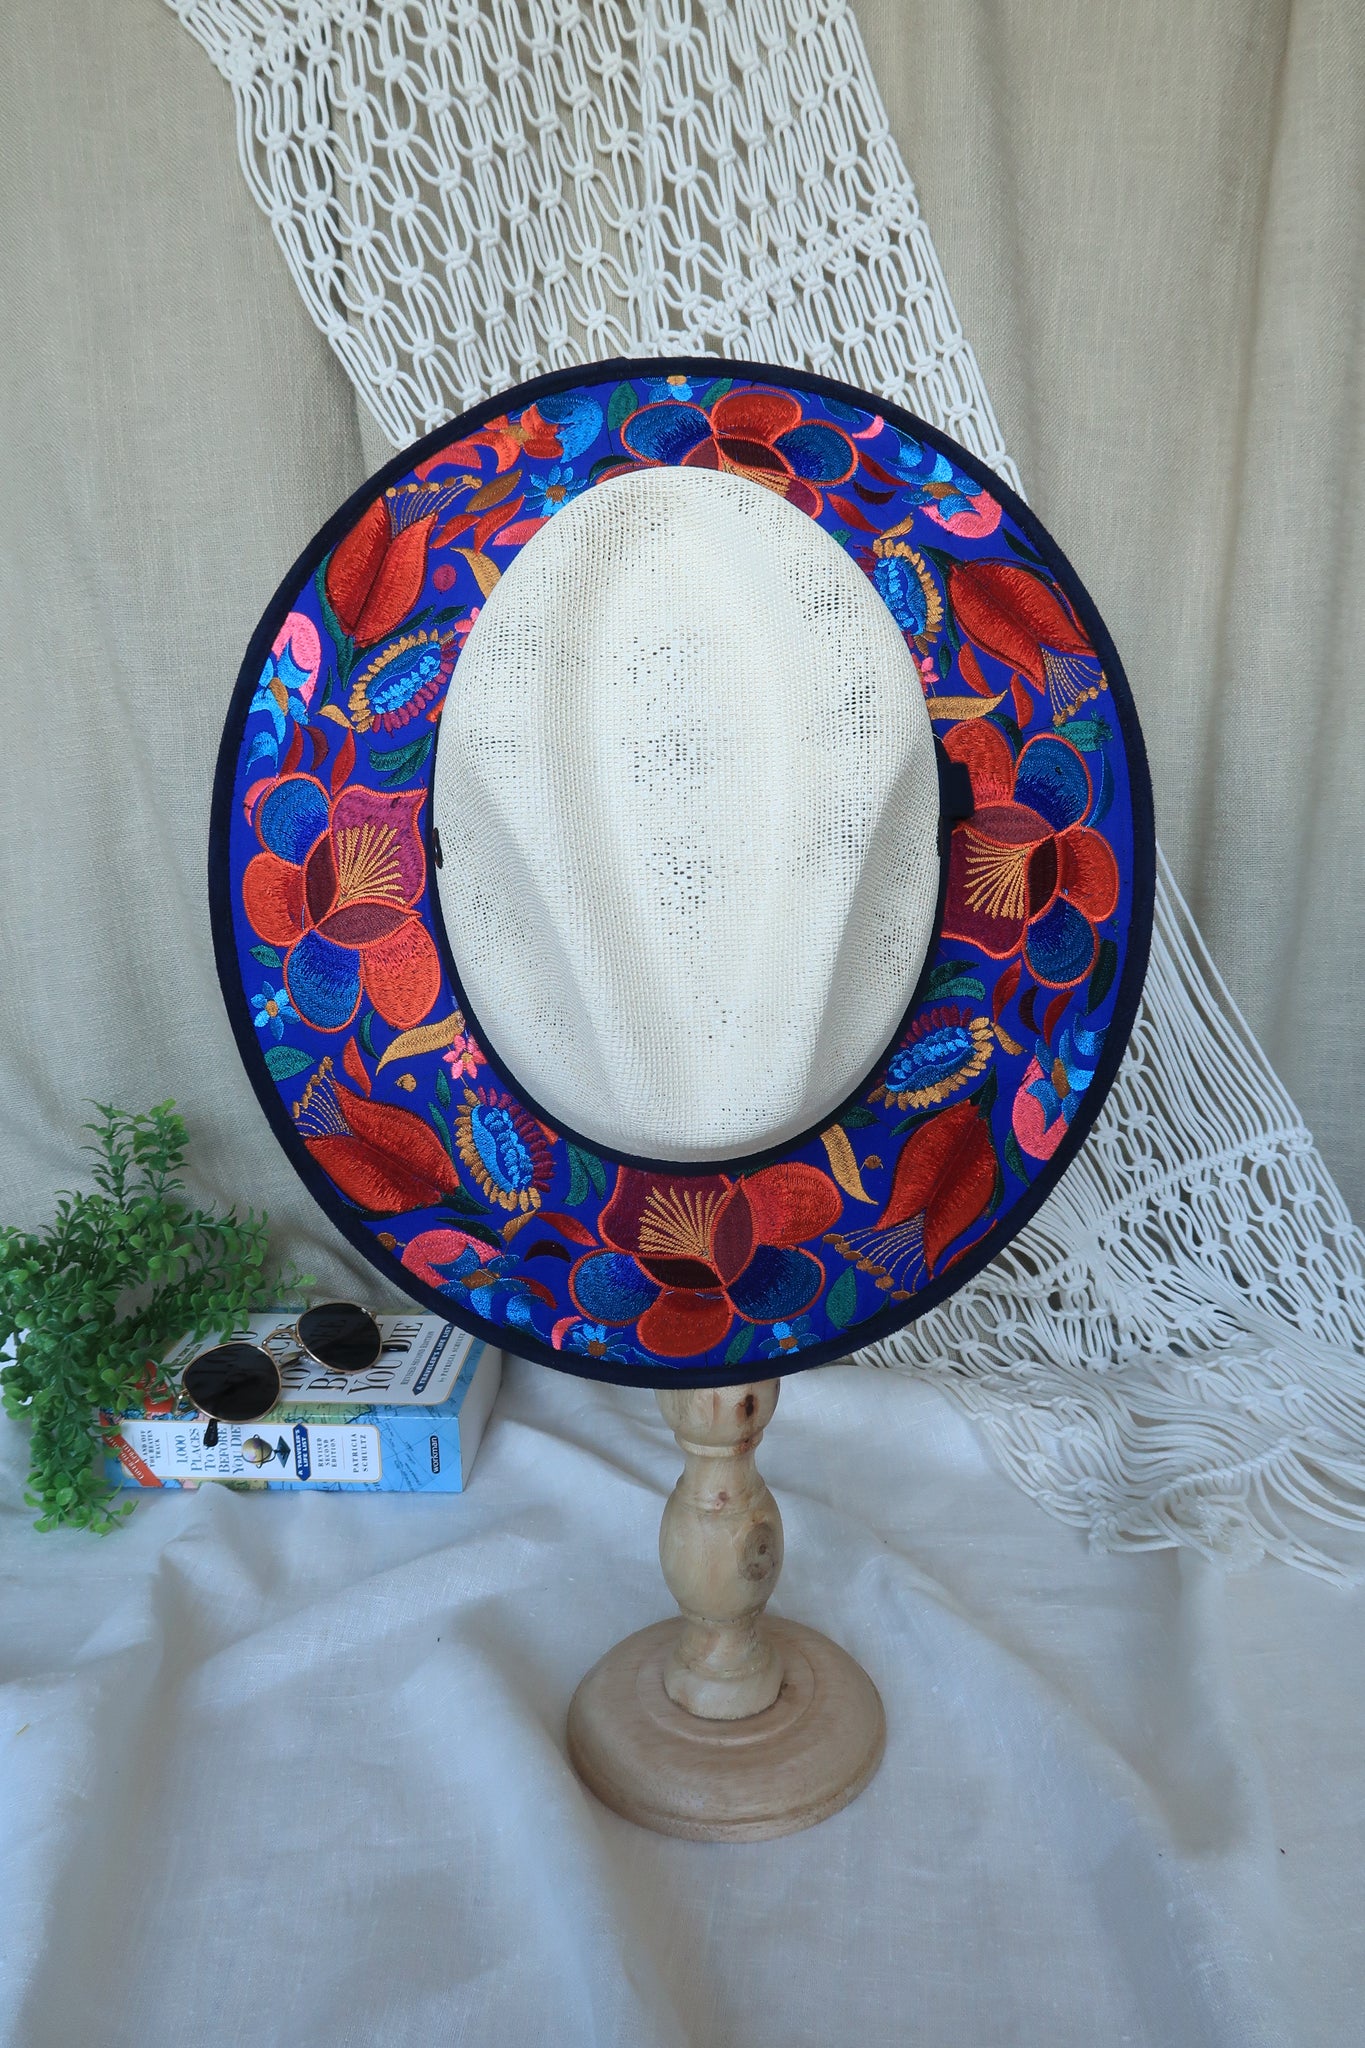 Royal Blue Floral Embroidered Fedora